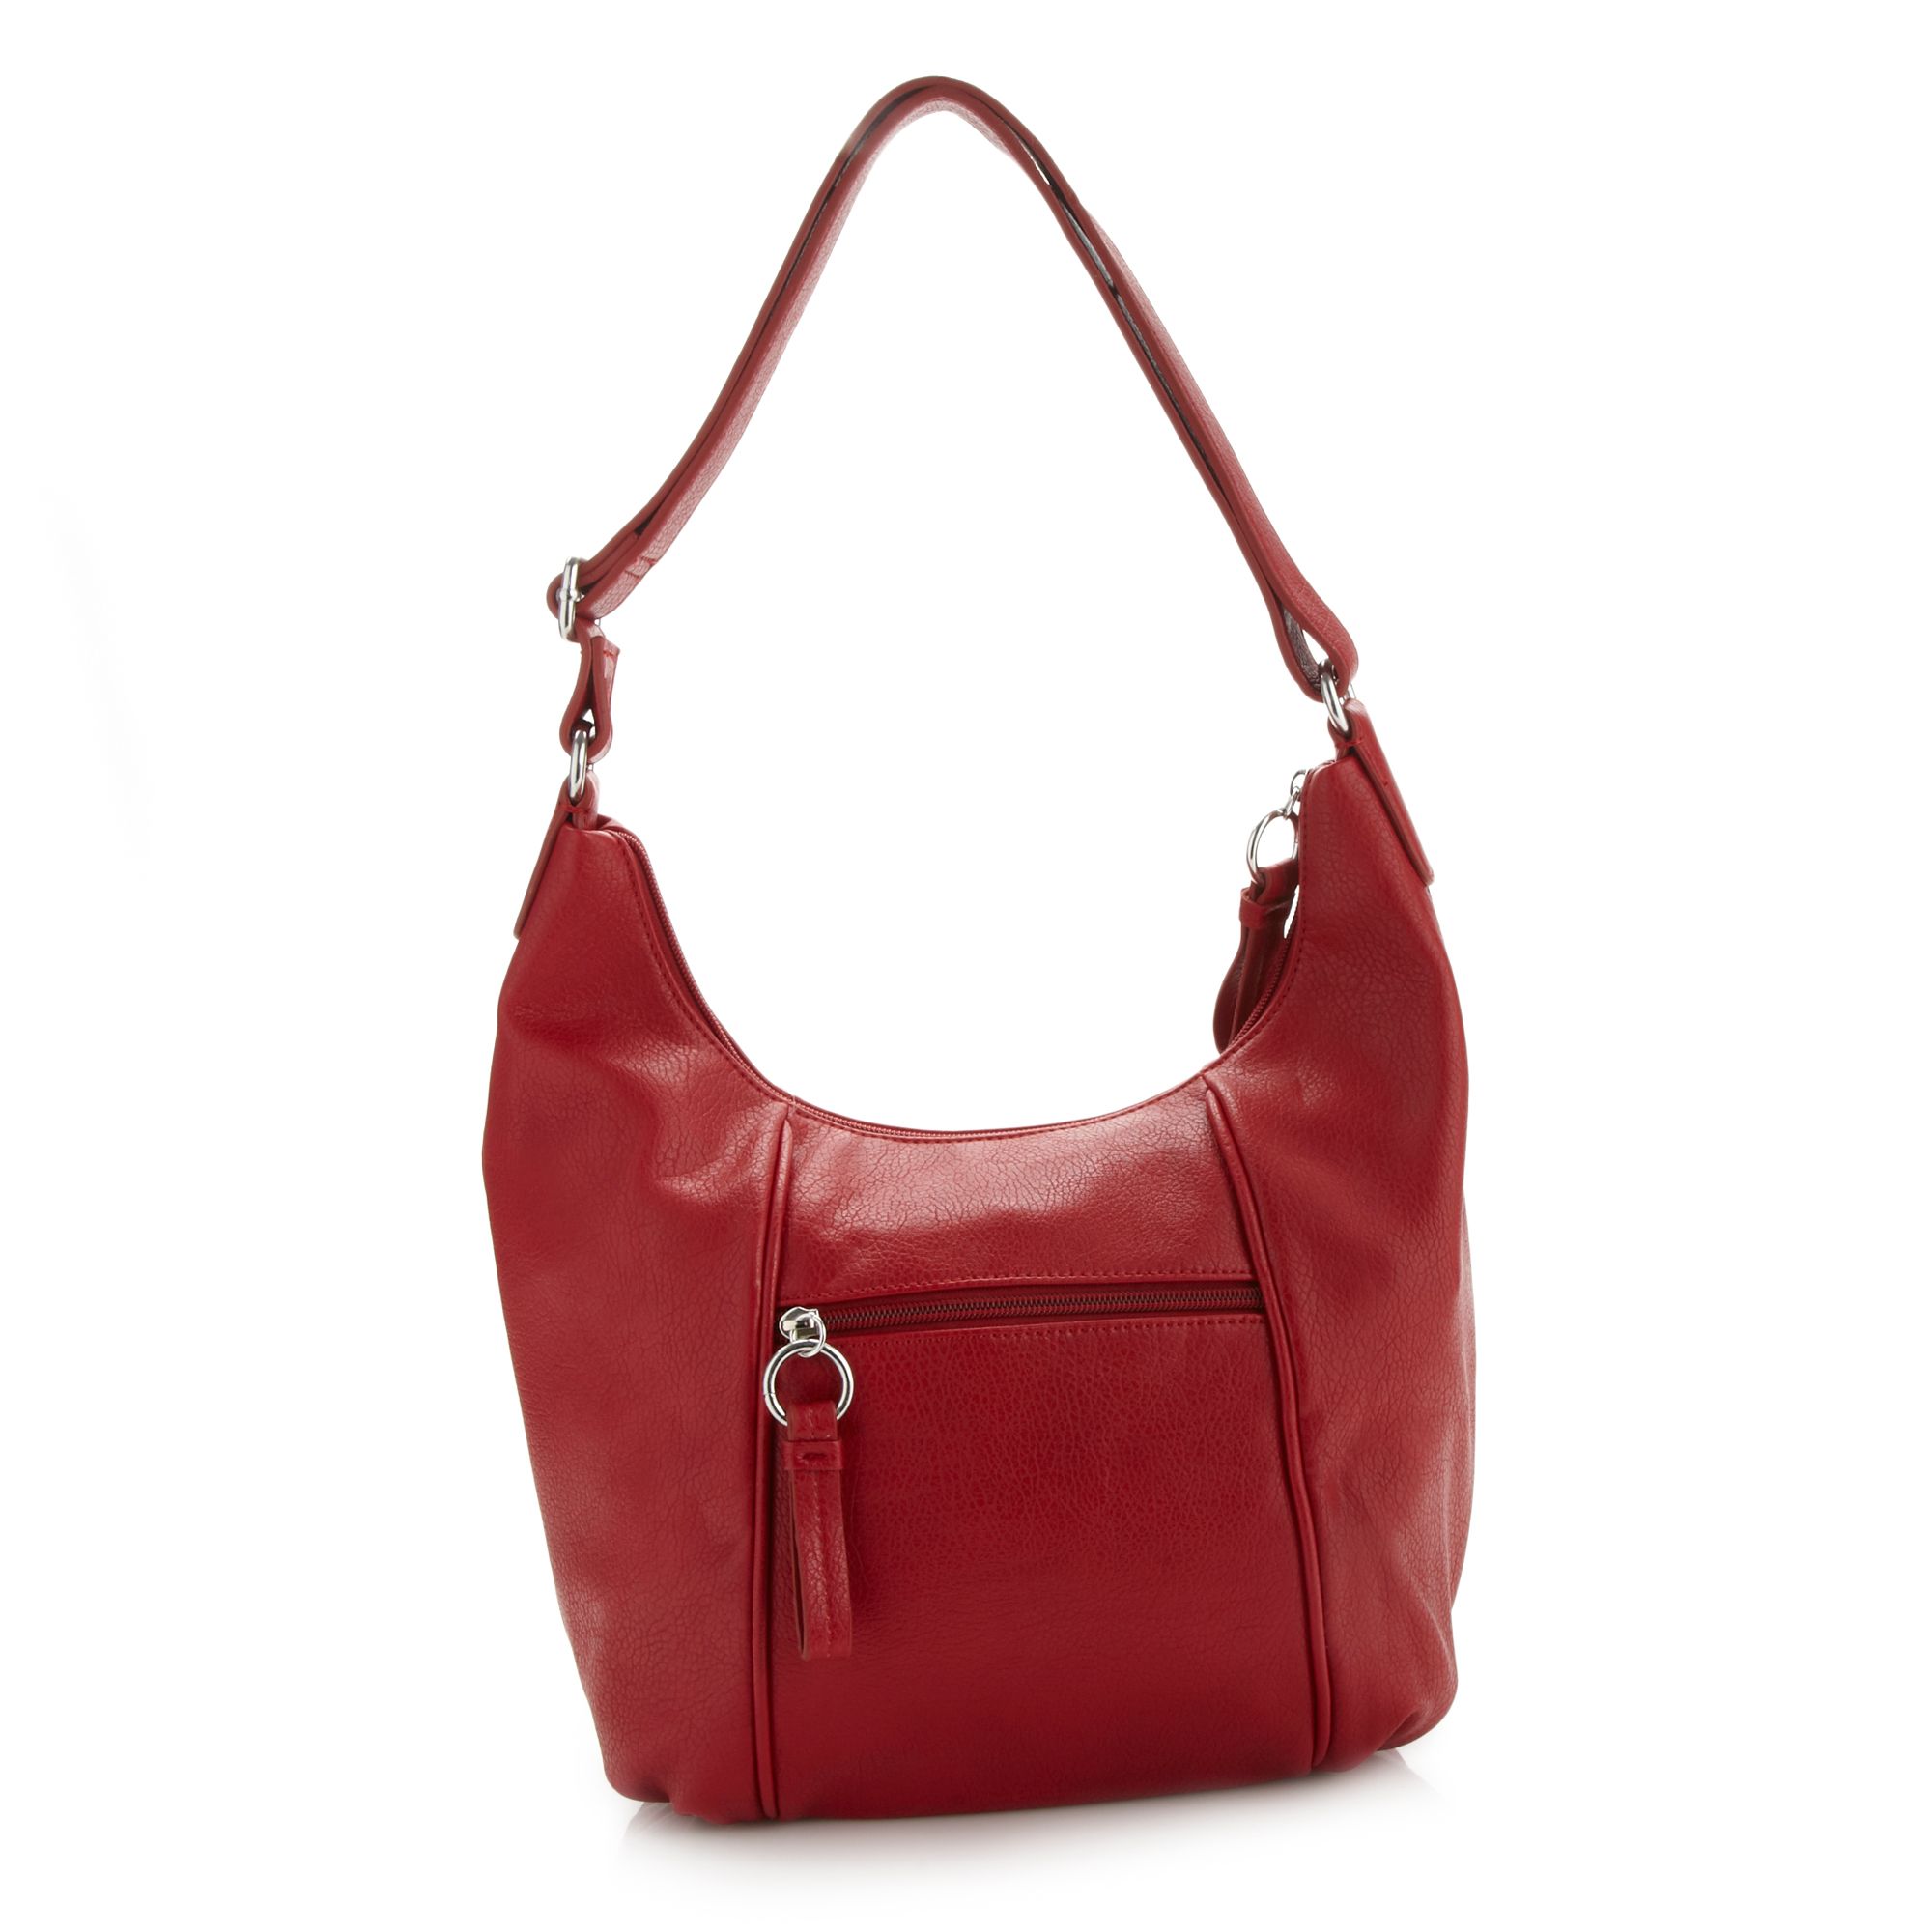 The Collection Womens Red Scooped Shoulder Bag From Debenhams | eBay